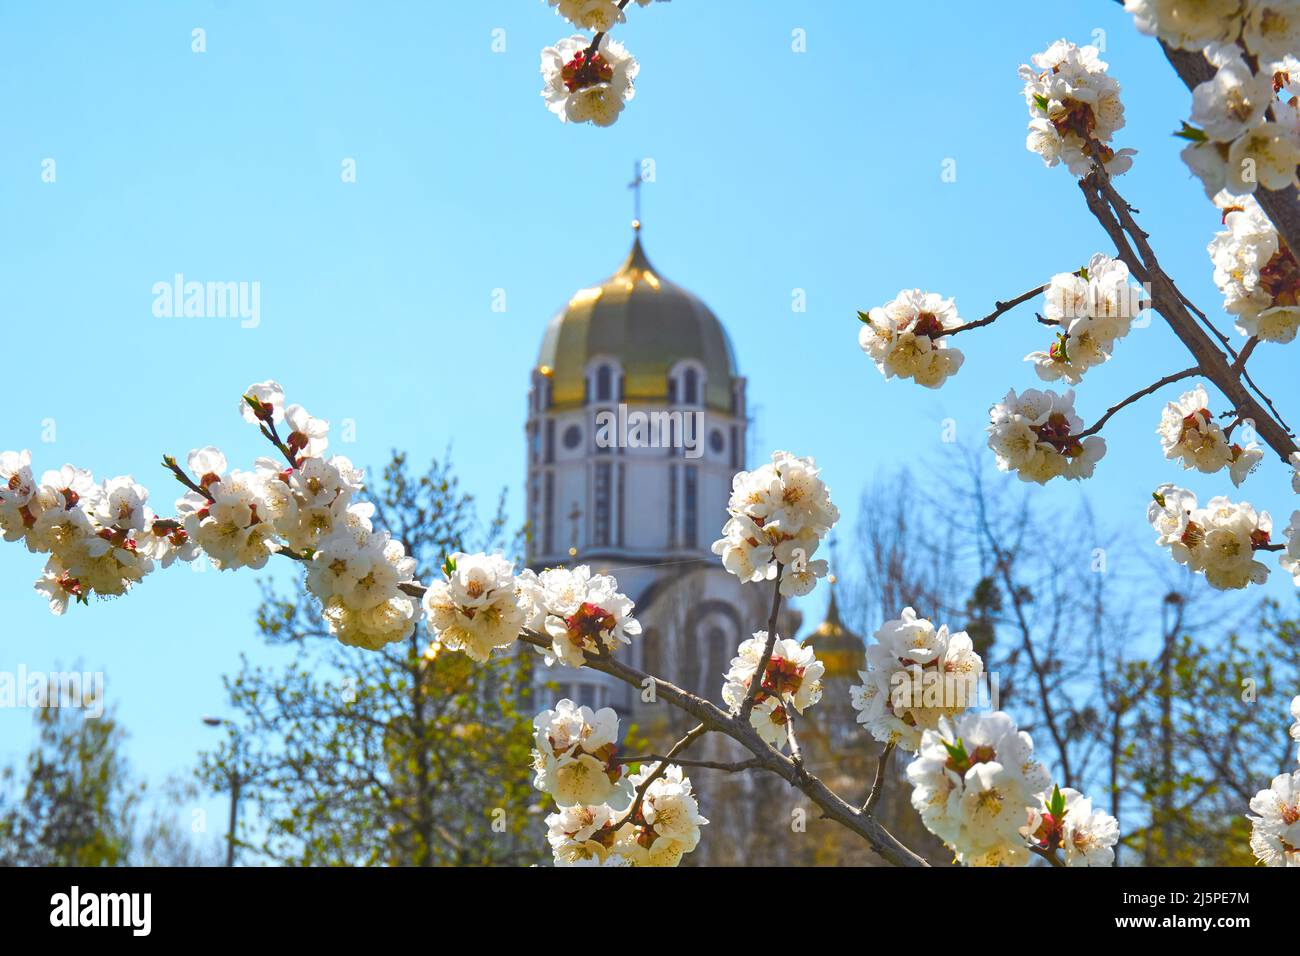 Frame of pink and tender flowers and the golden dome of the church, easter sky Stock Photo